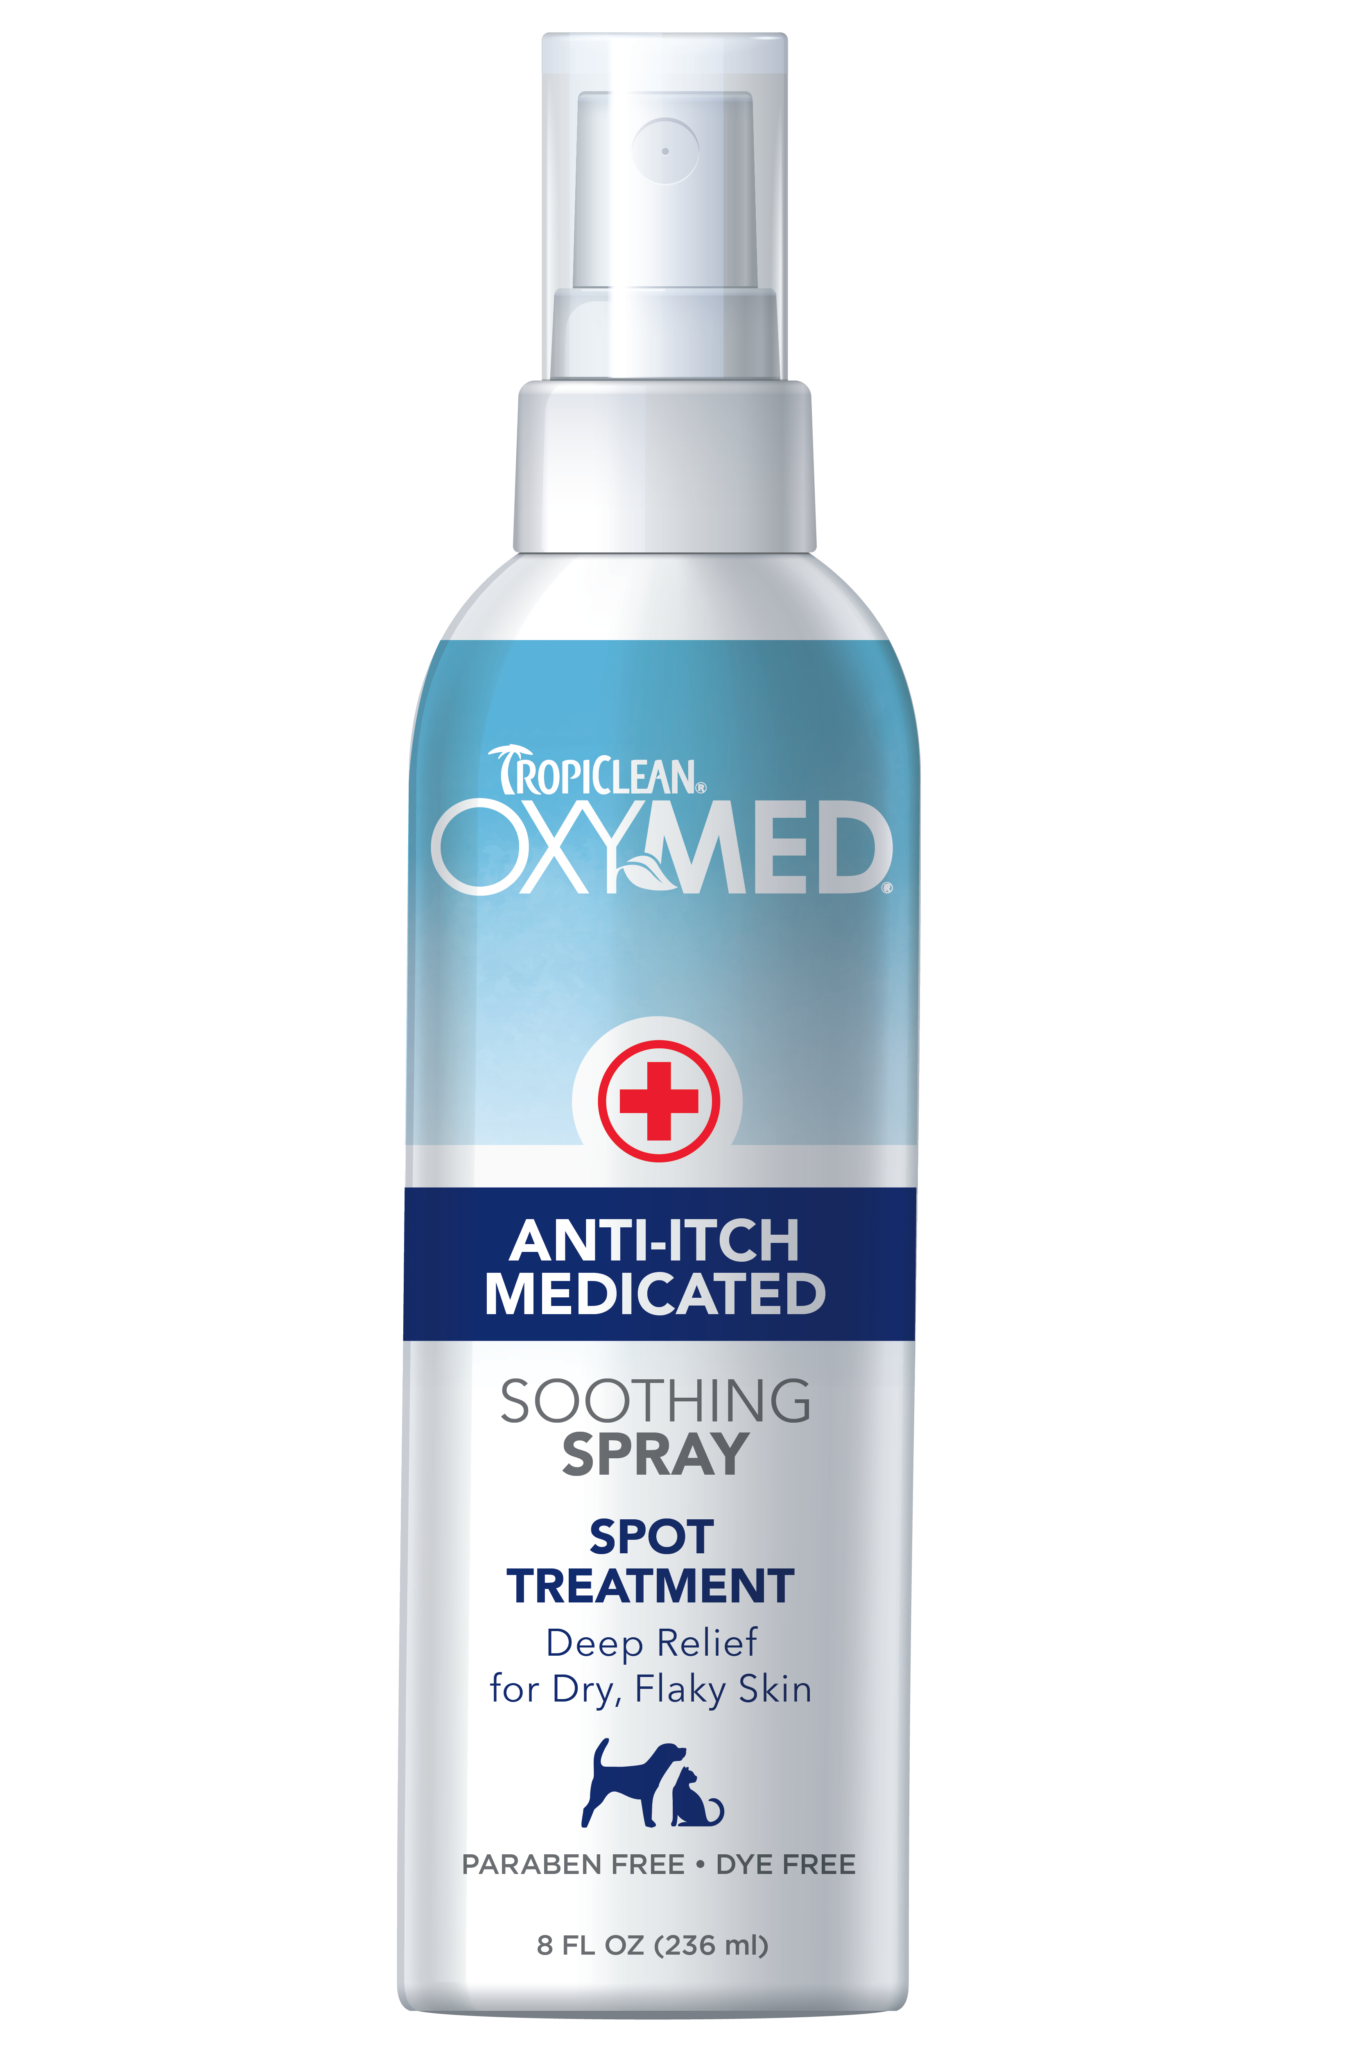 Tropiclean Oxymed Anti-Itch Medicated Soothing Spray